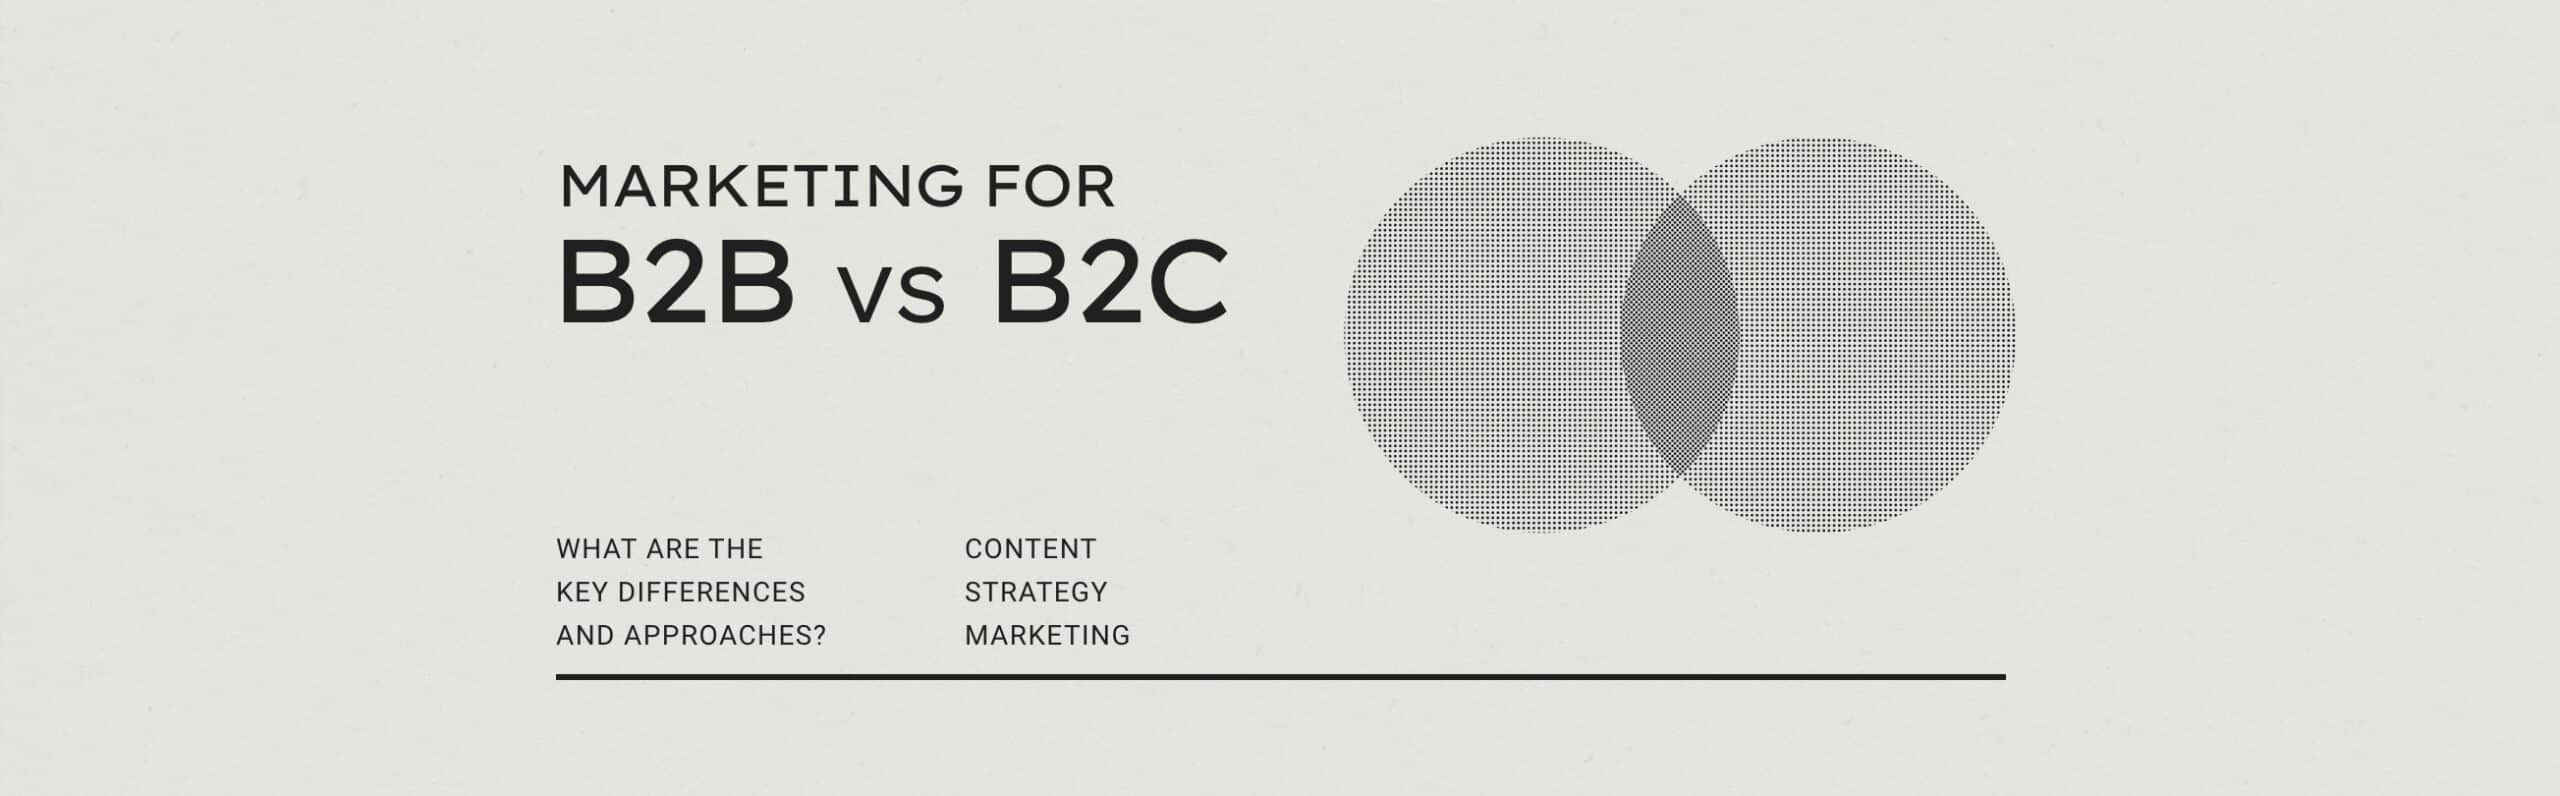 Marketing for B2B vs. B2C: Key Differences and Approaches